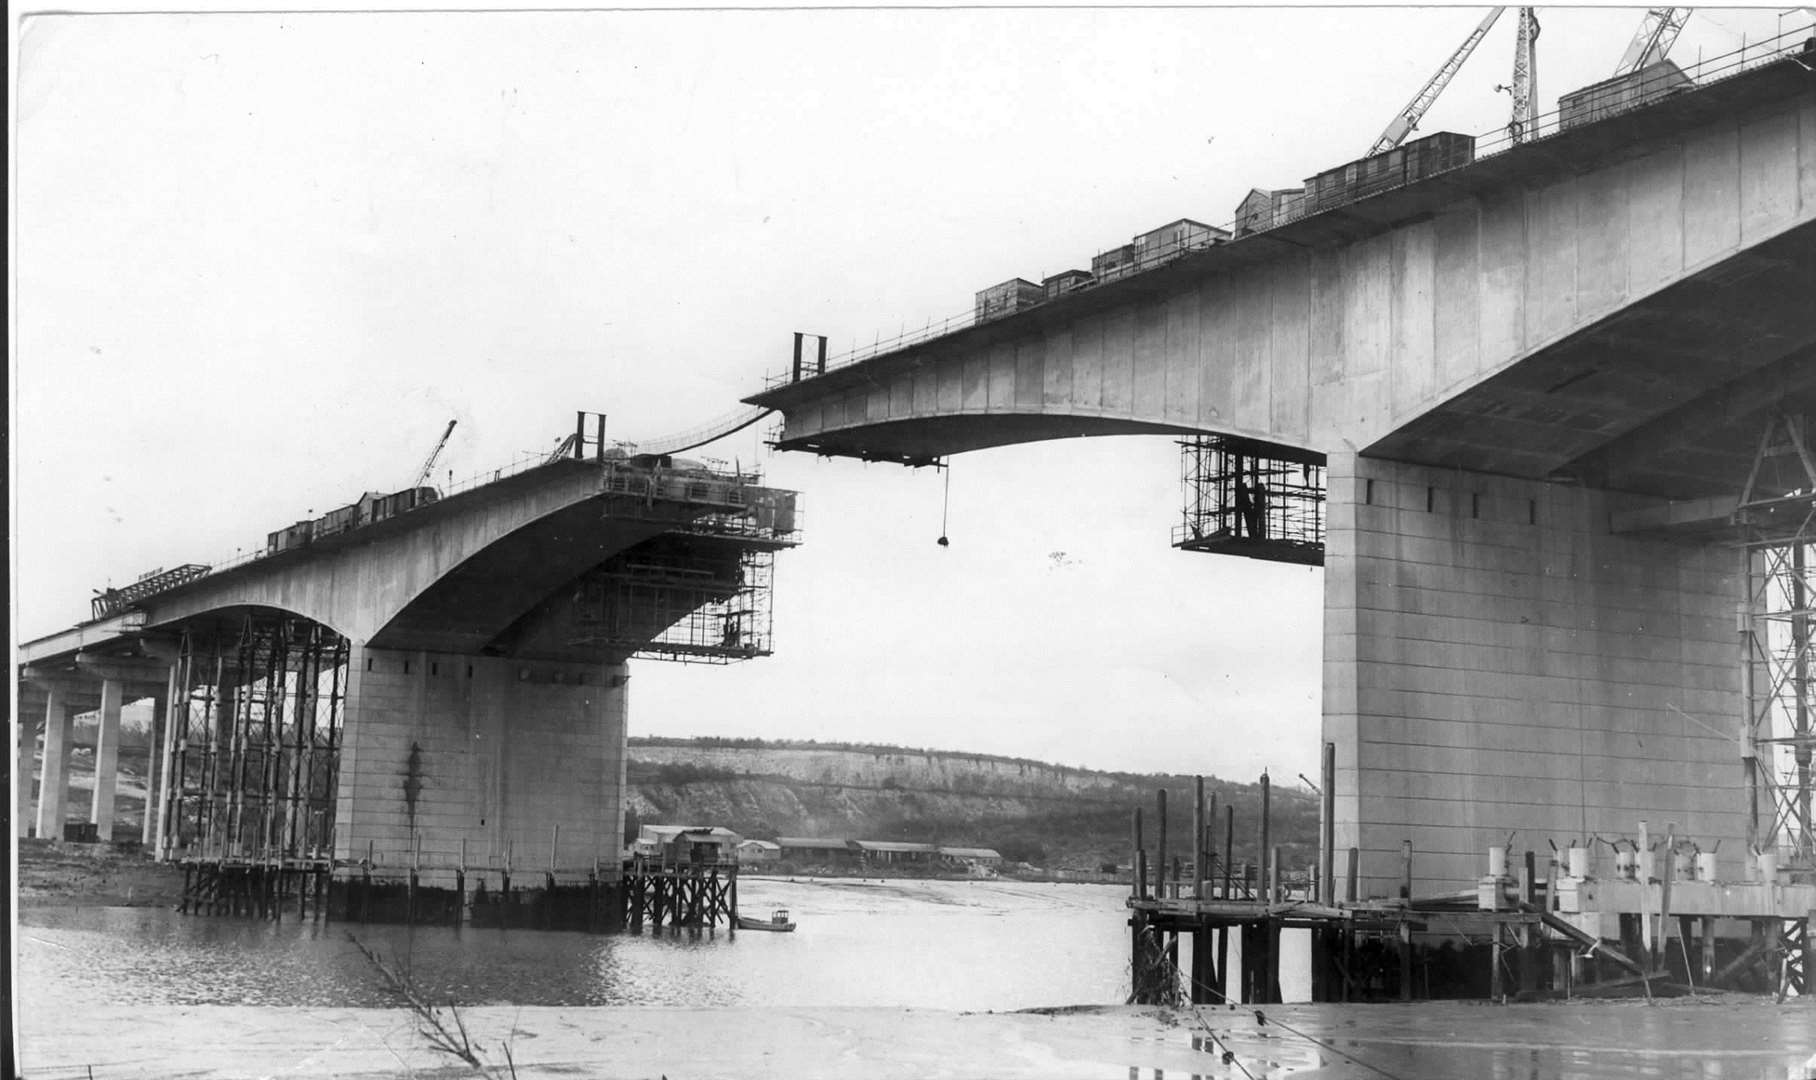 The New Medway Bridge under construction in November 1962